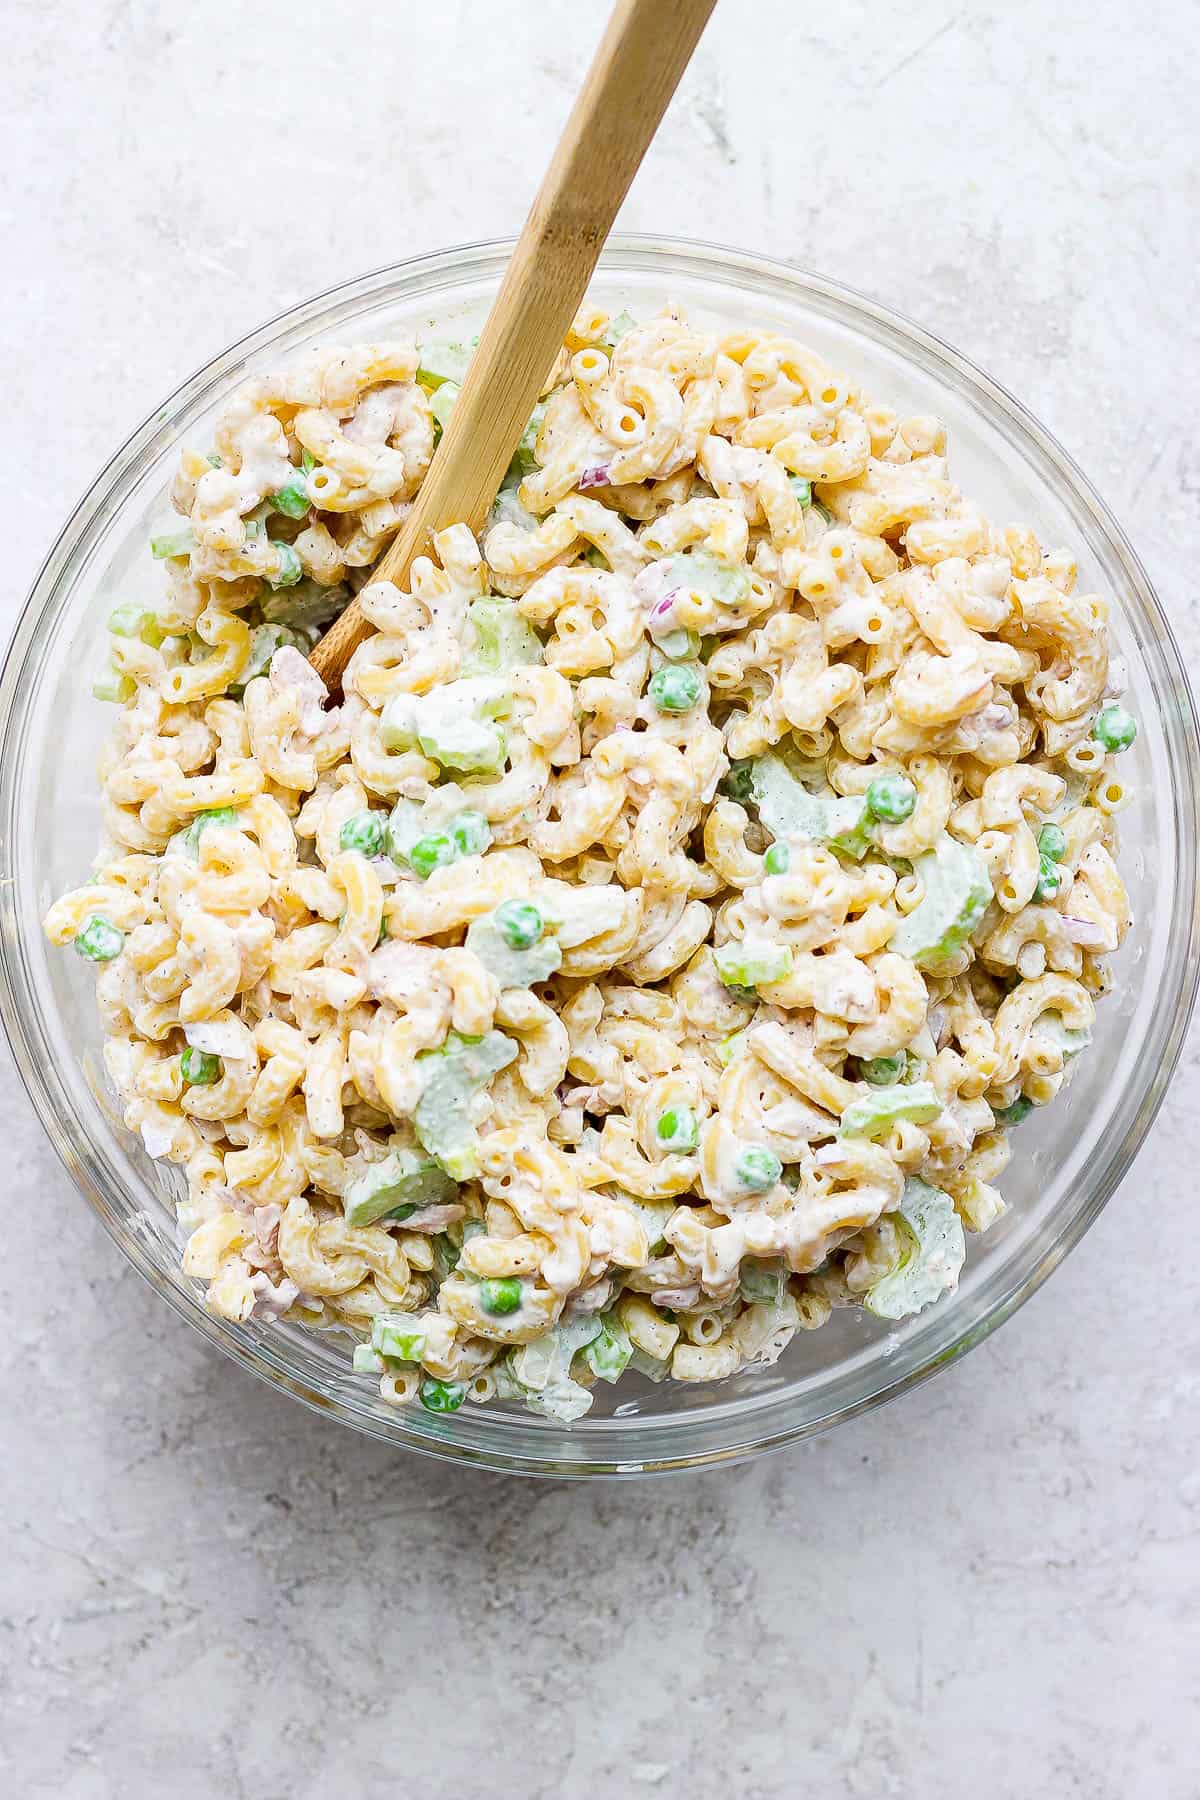 Tuna macaroni salad mixed together in a bowl with a wooden spoon.